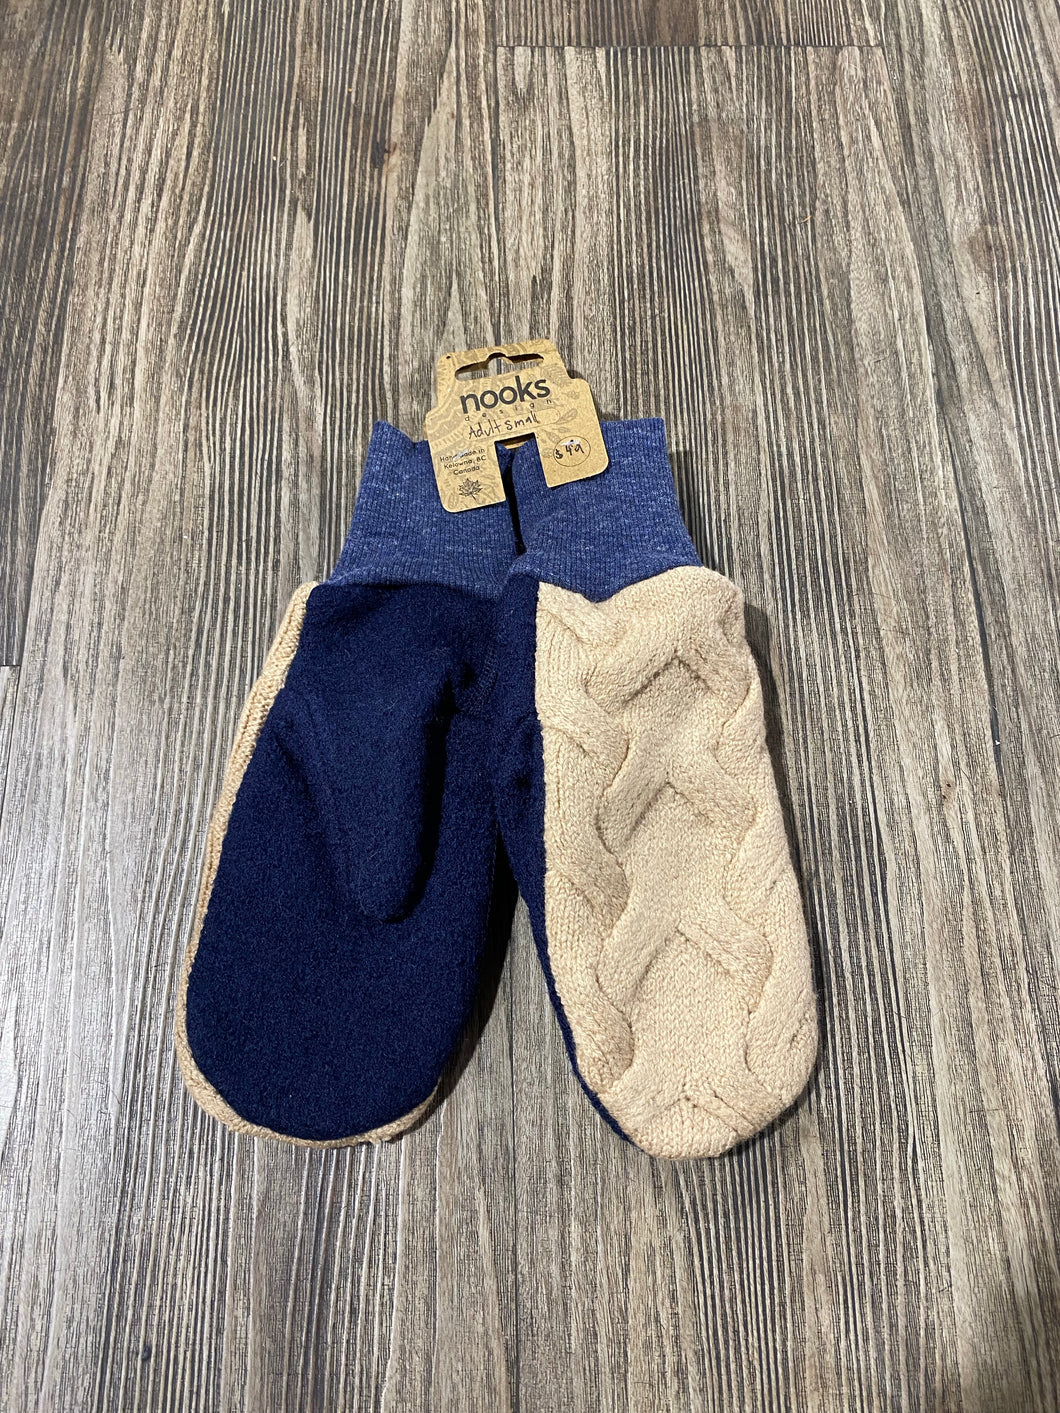 Nooks Mitts (Adult Small)